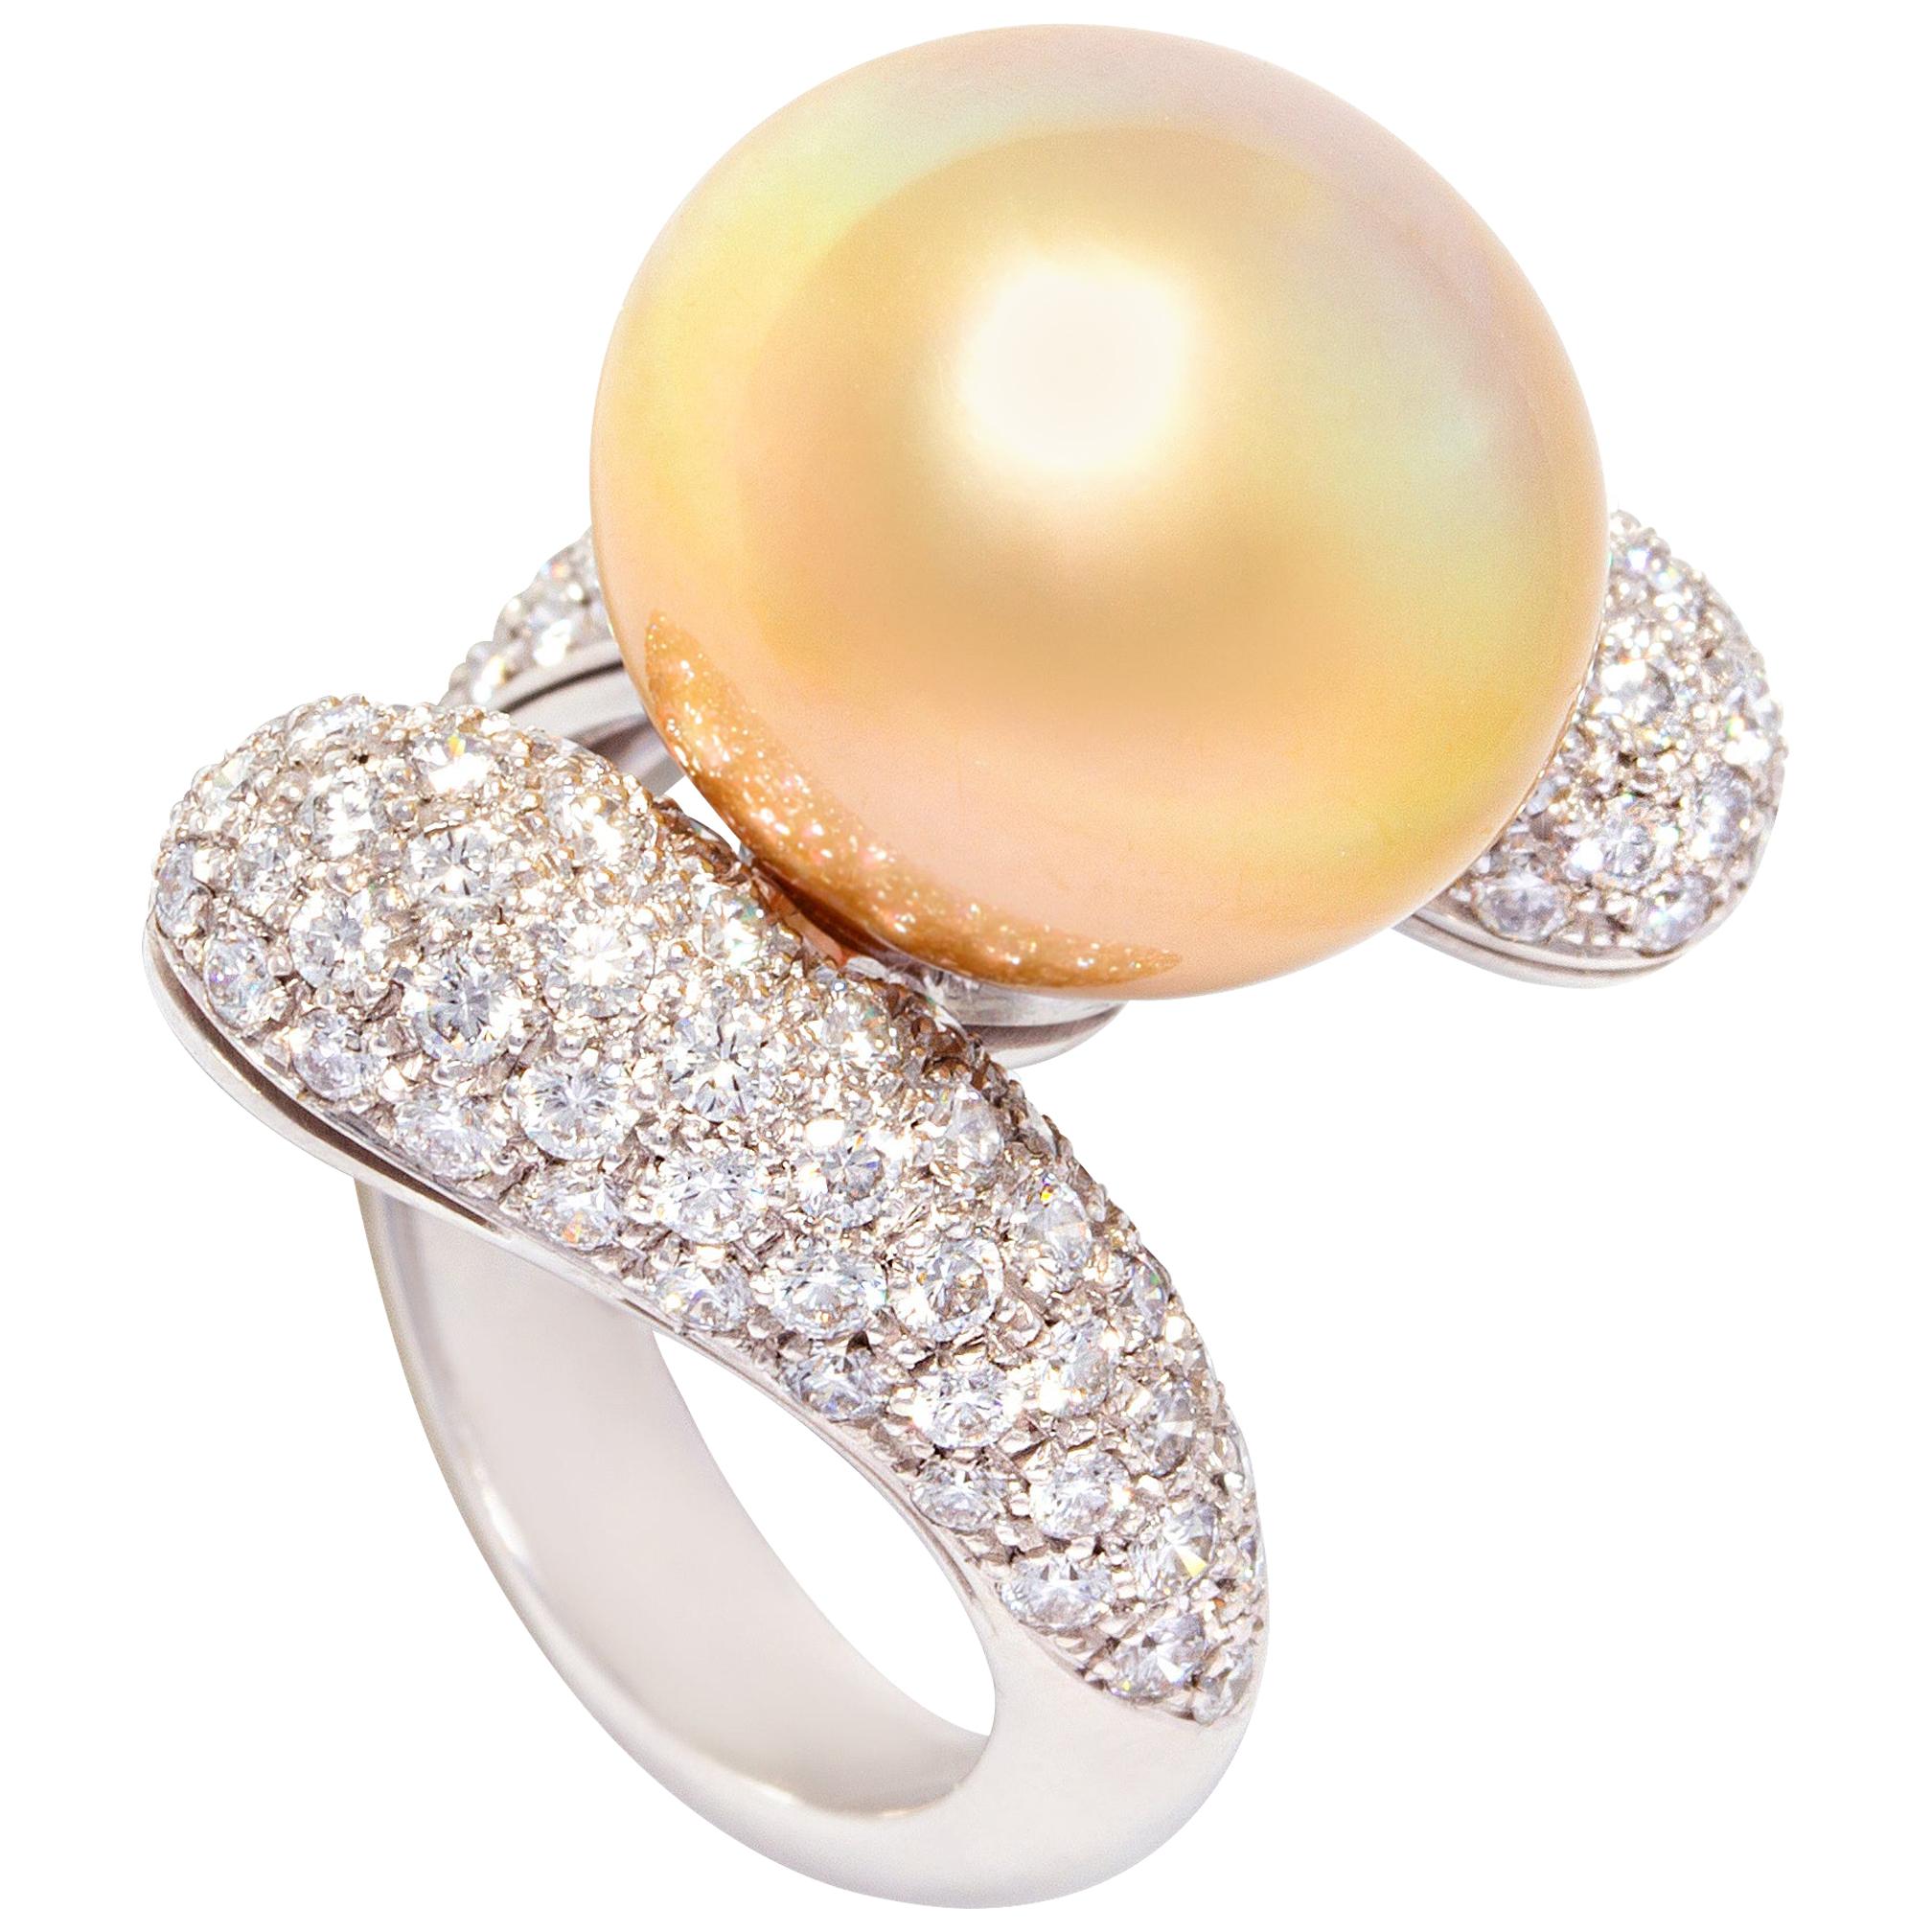 Ella Gafter Golden South Sea Pearl Diamond Cocktail Ring